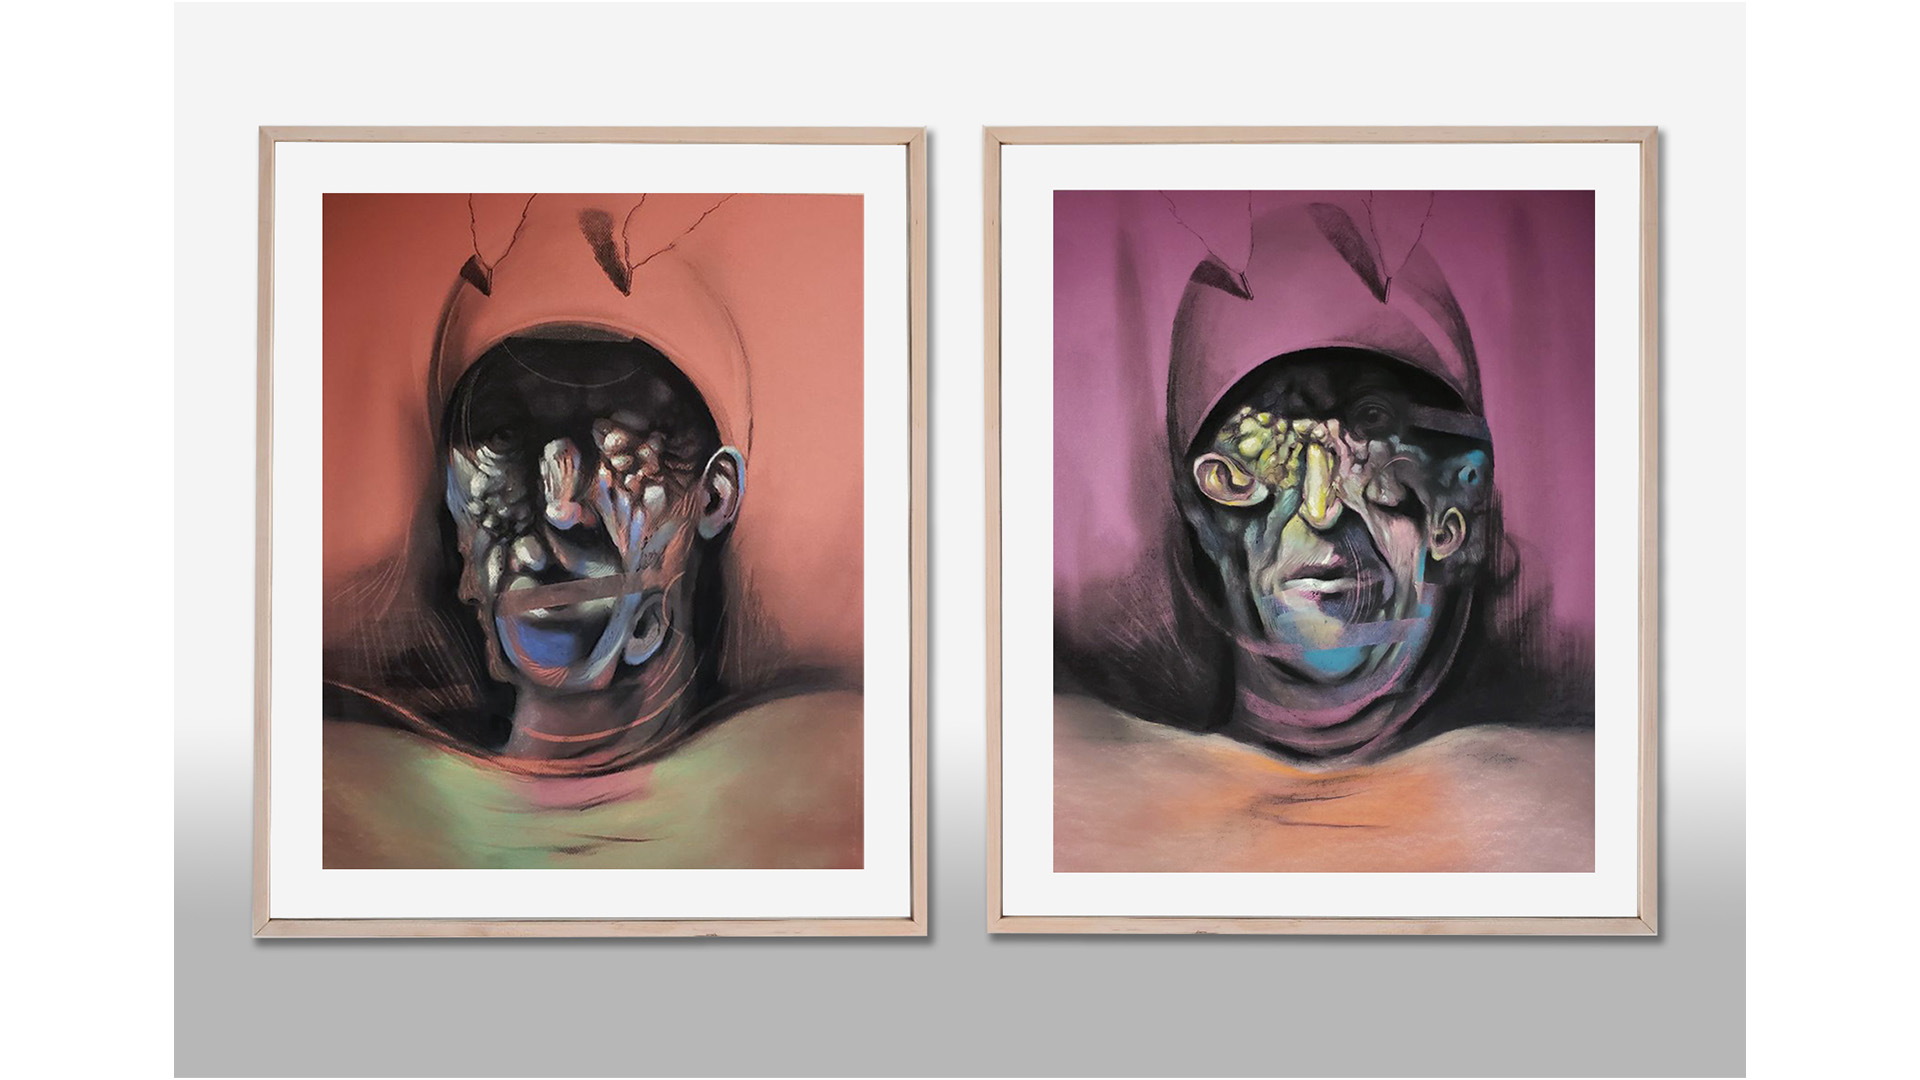 Pastel drawings on paper in a diptych formation, titled "Memories Transfigured II," and created by Pouya Afshar